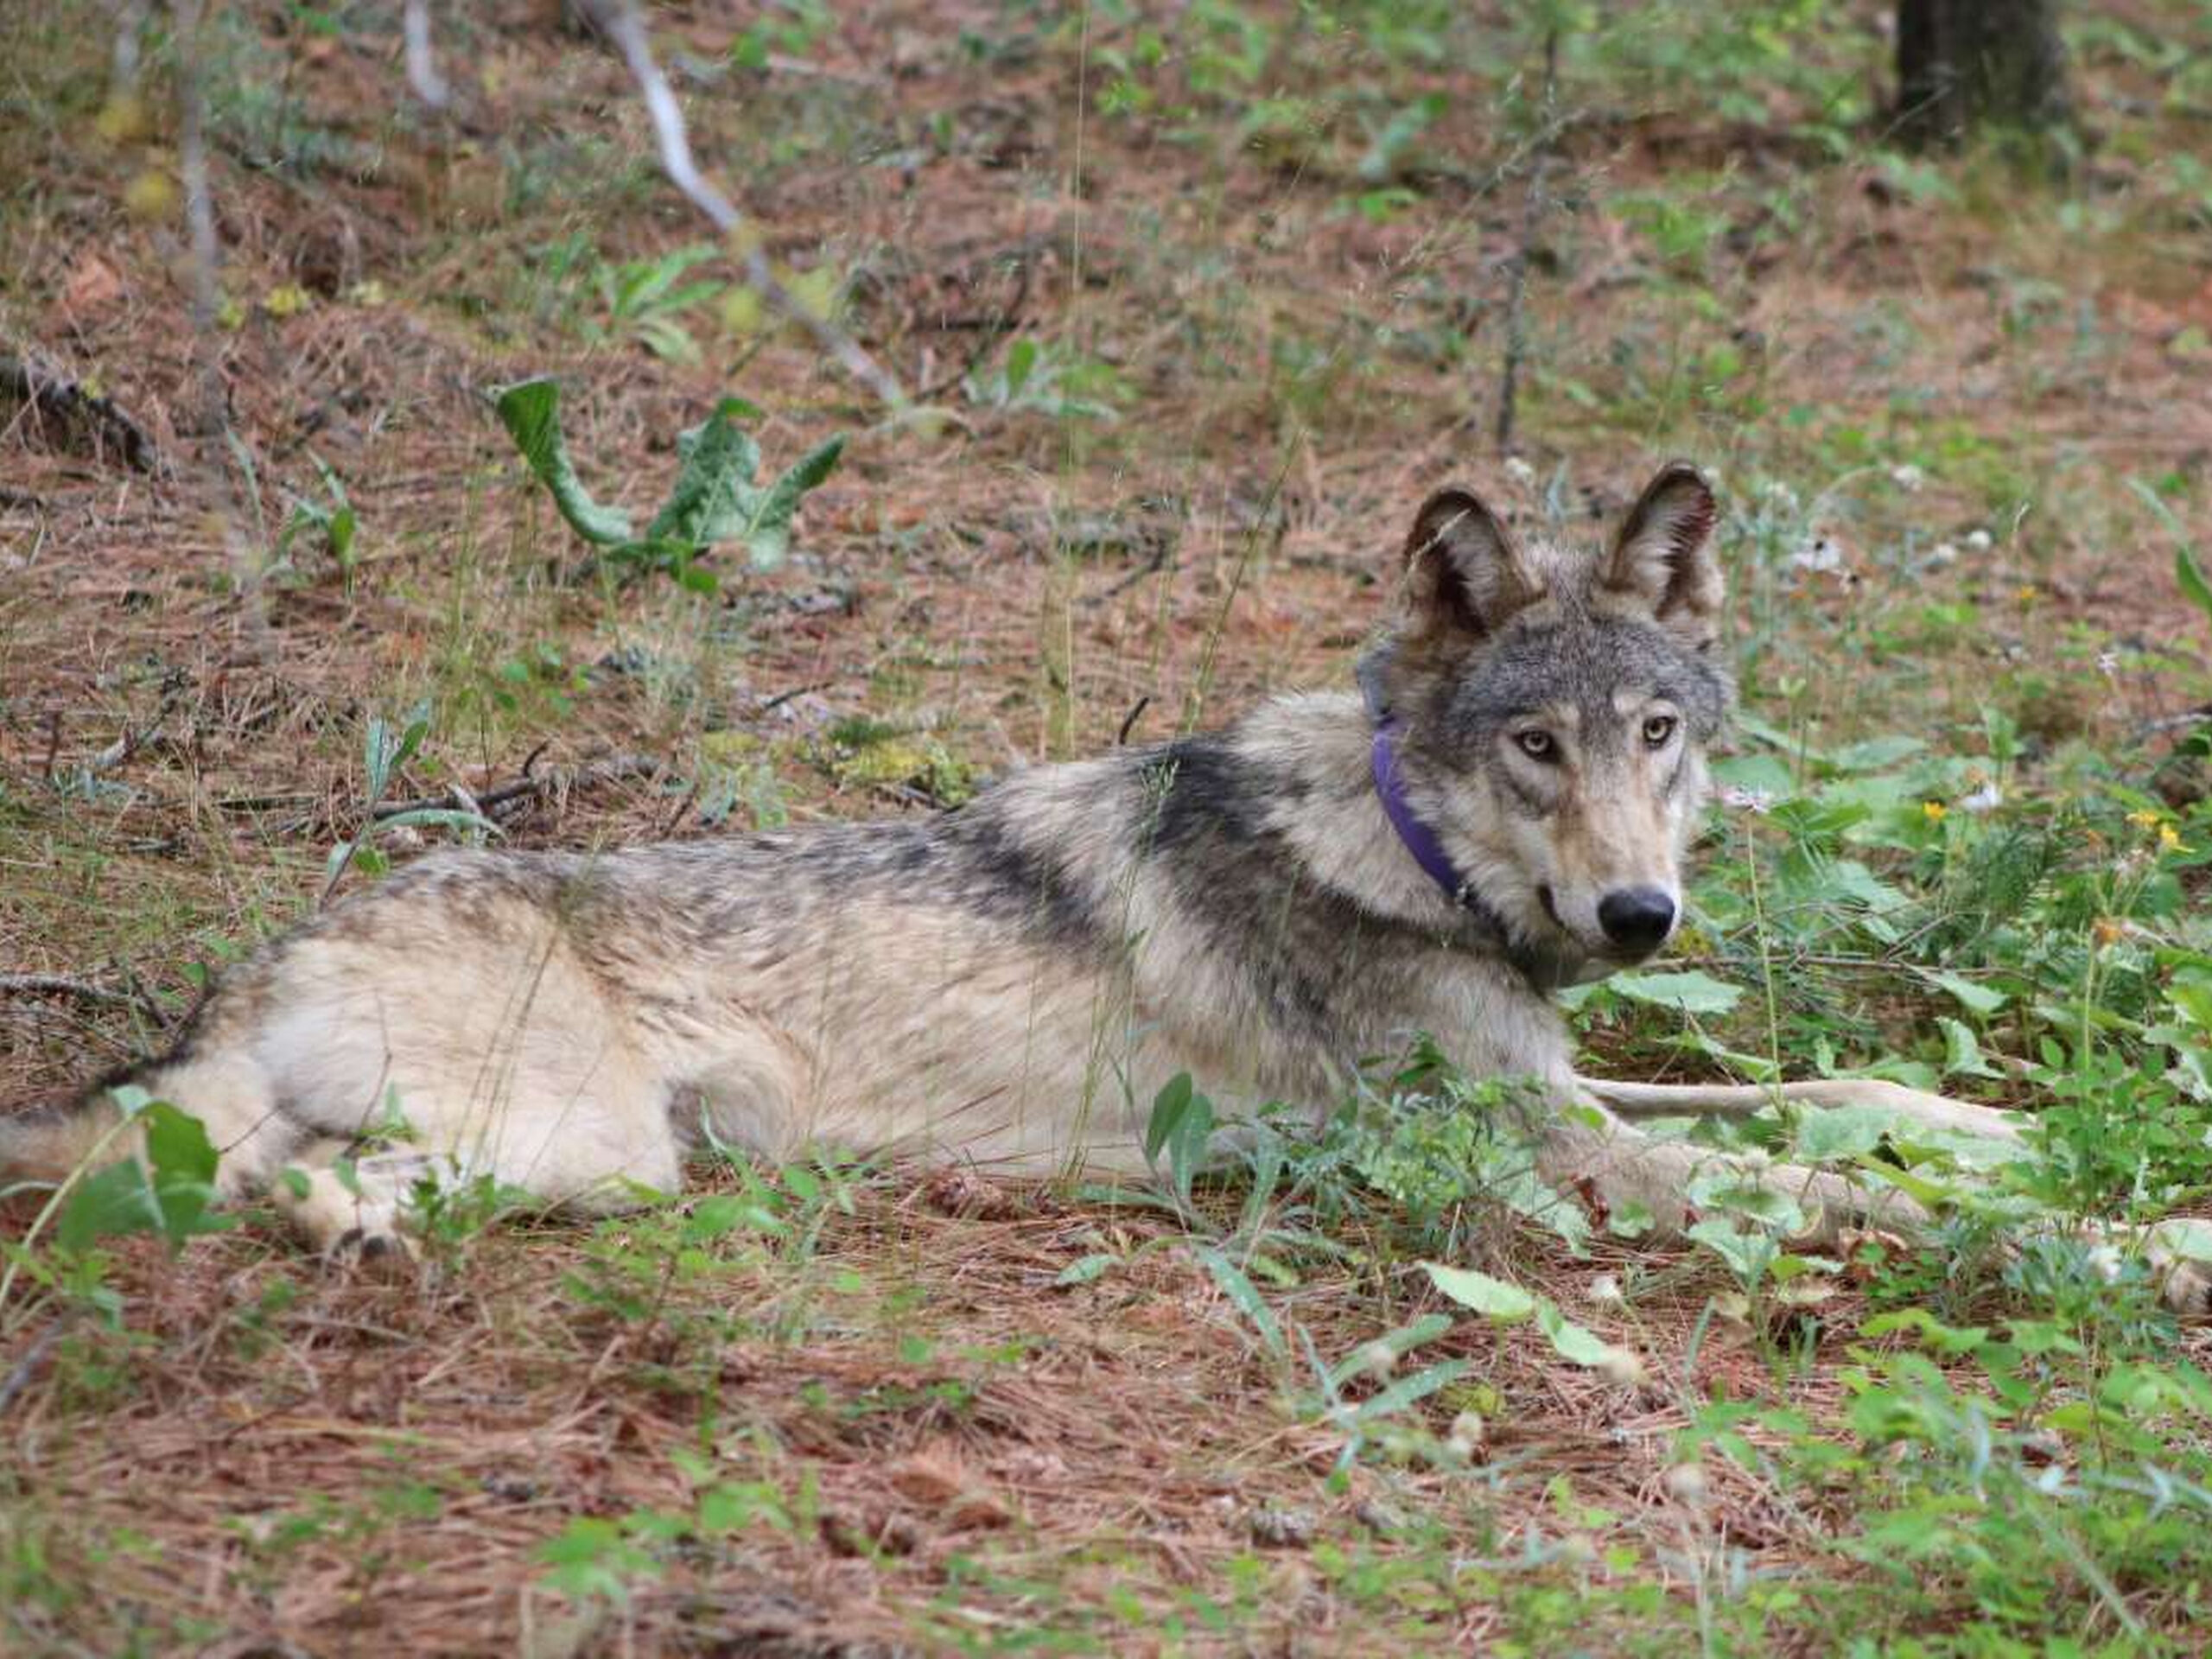 This February 2021 photo released by the California Department of Fish and Wildlife shows a protected gray wolf near Yosemite, Calif.